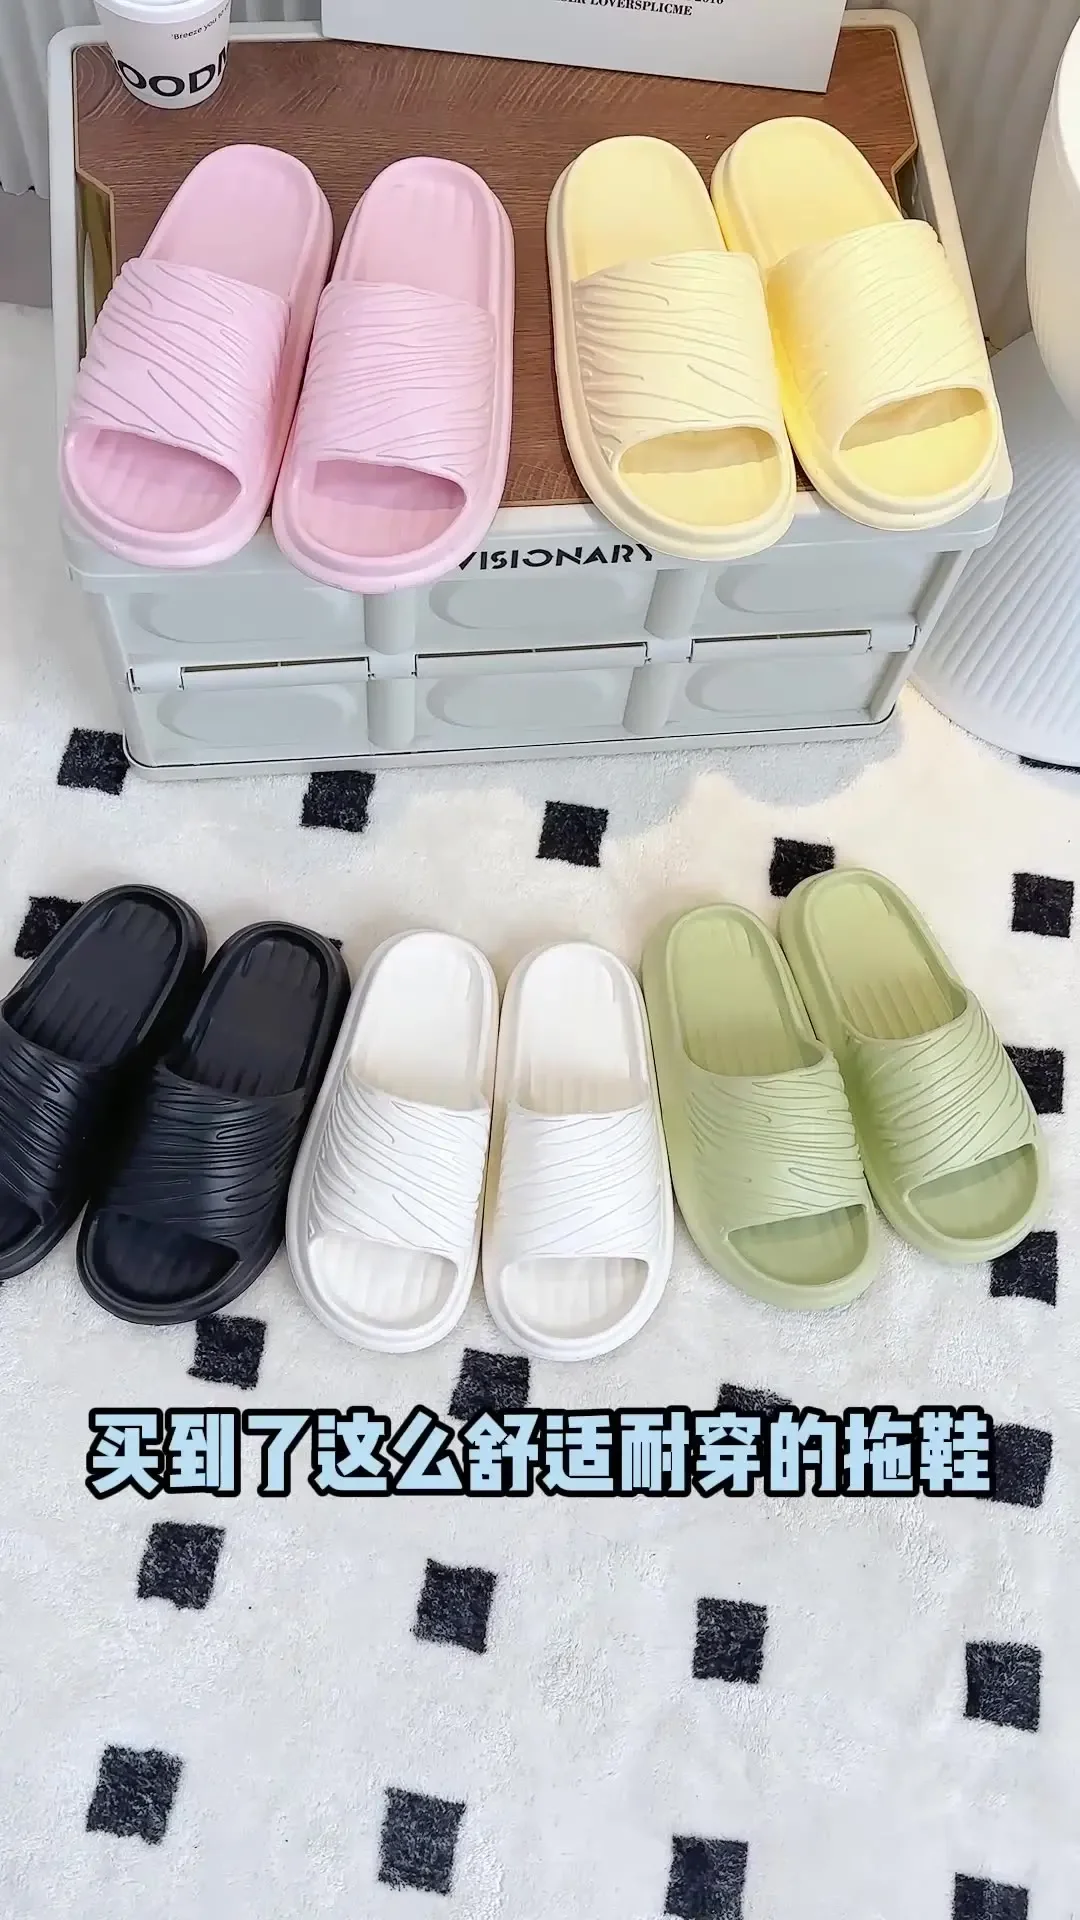 

581Bathroom slippers for men and women, home slippers